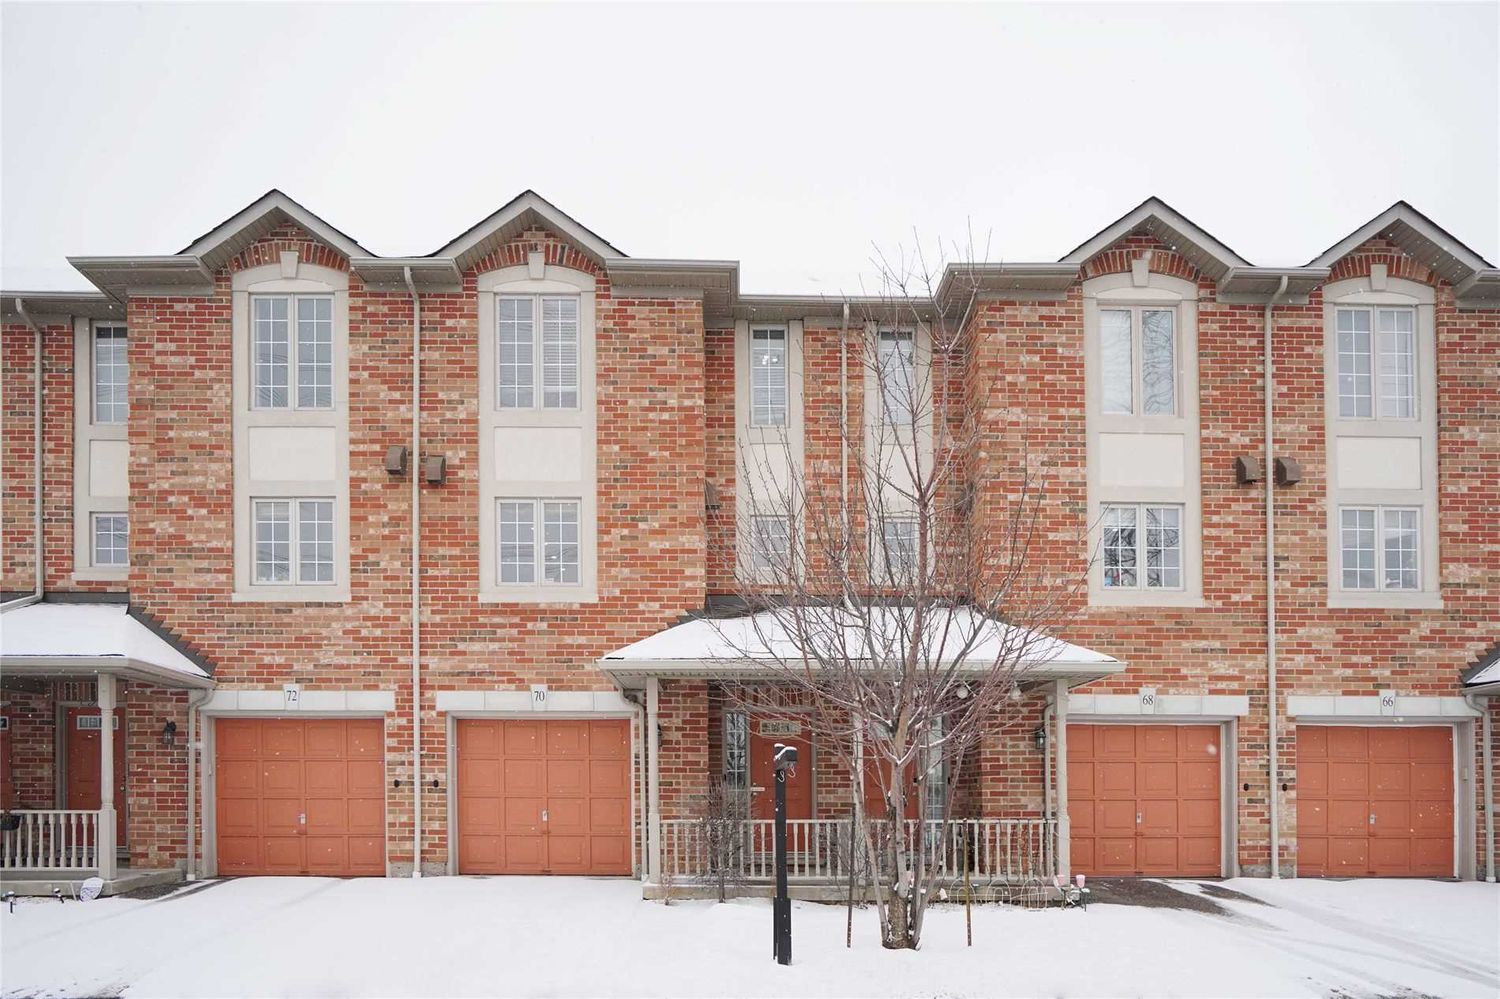 7385 Magistrate Terrace. 7385 Magistrate Terrace Townhomes is located in  Mississauga, Toronto - image #1 of 2